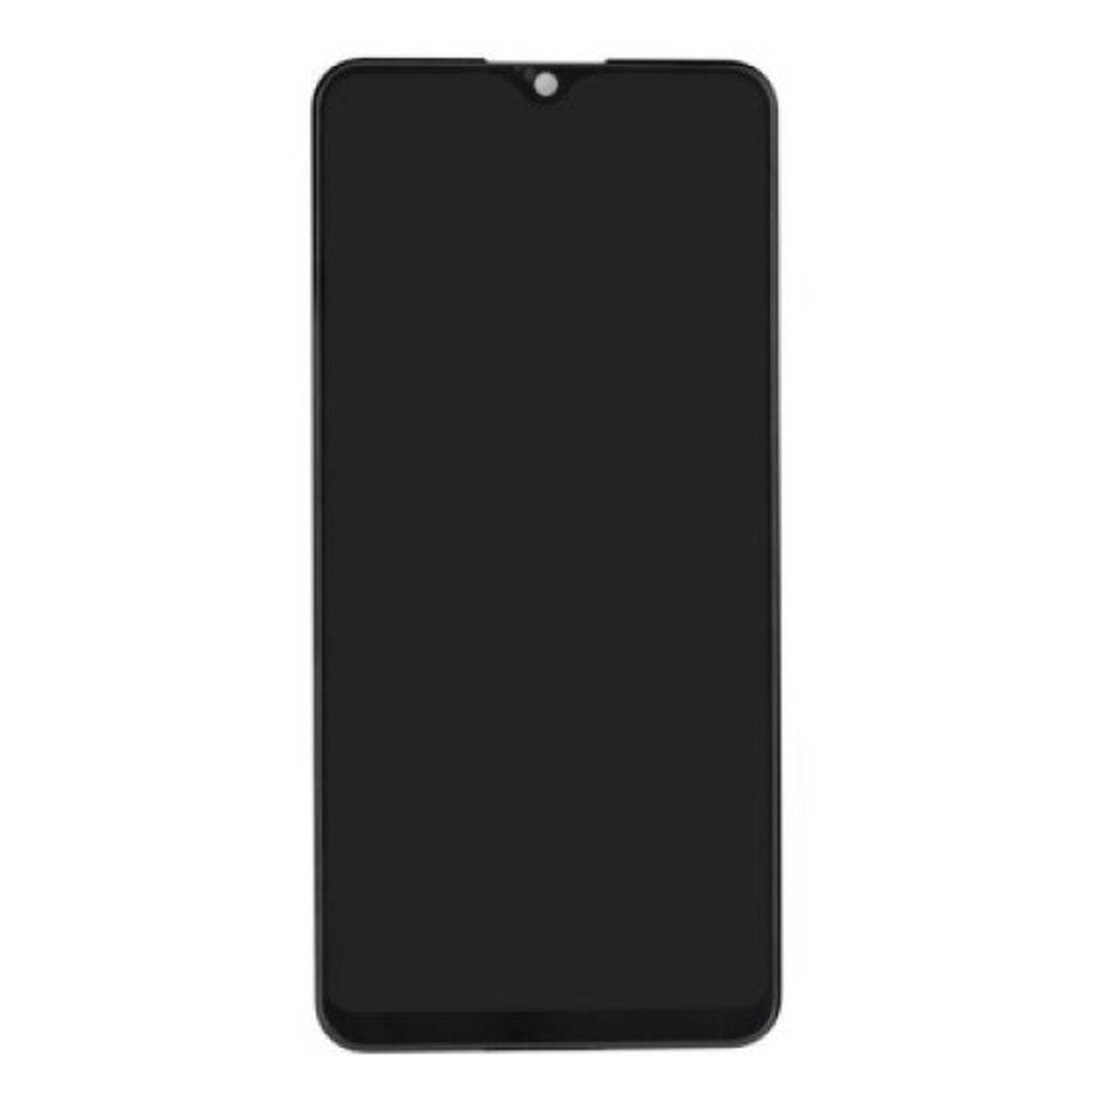 LCD WITH TOUCH SCREEN FOR VIVO Y95/Y93/Y91/Y91i/Y90 - NICE OG